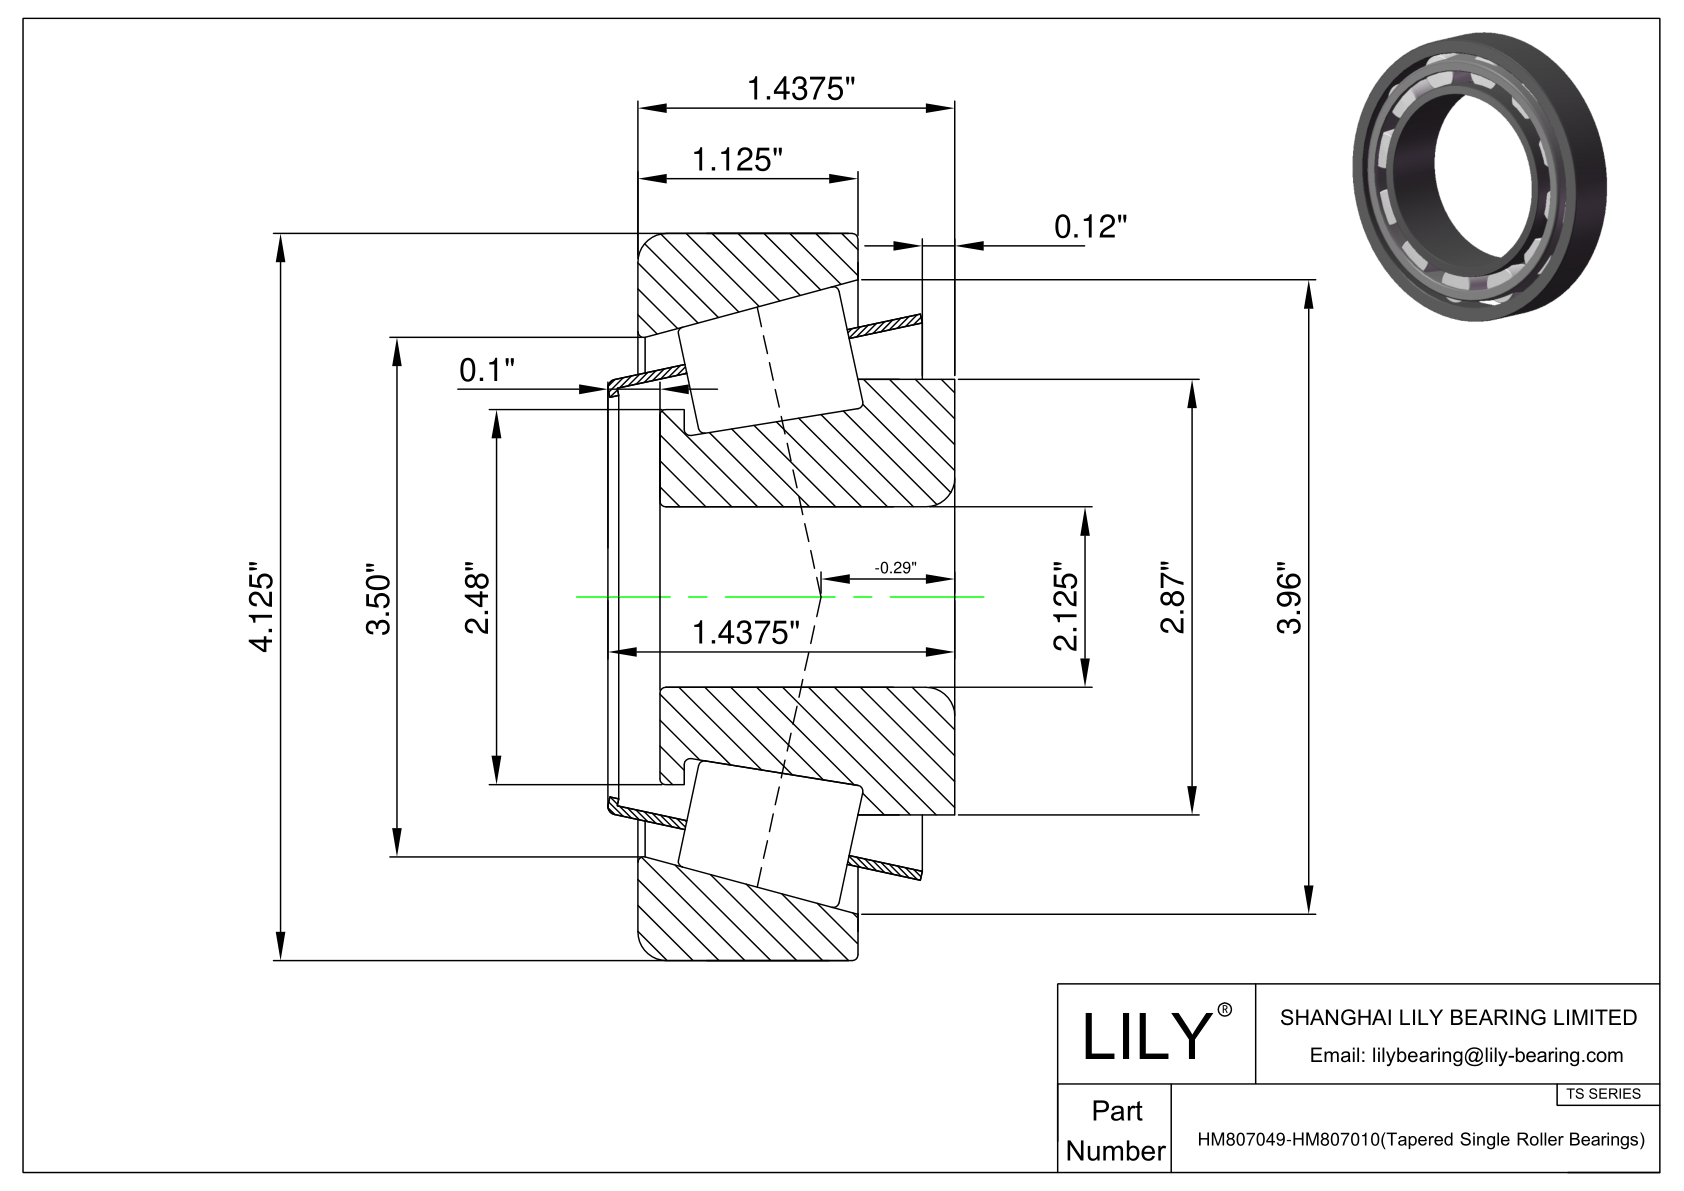 HM807049-HM807010 TS (Tapered Single Roller Bearings) (Imperial) cad drawing